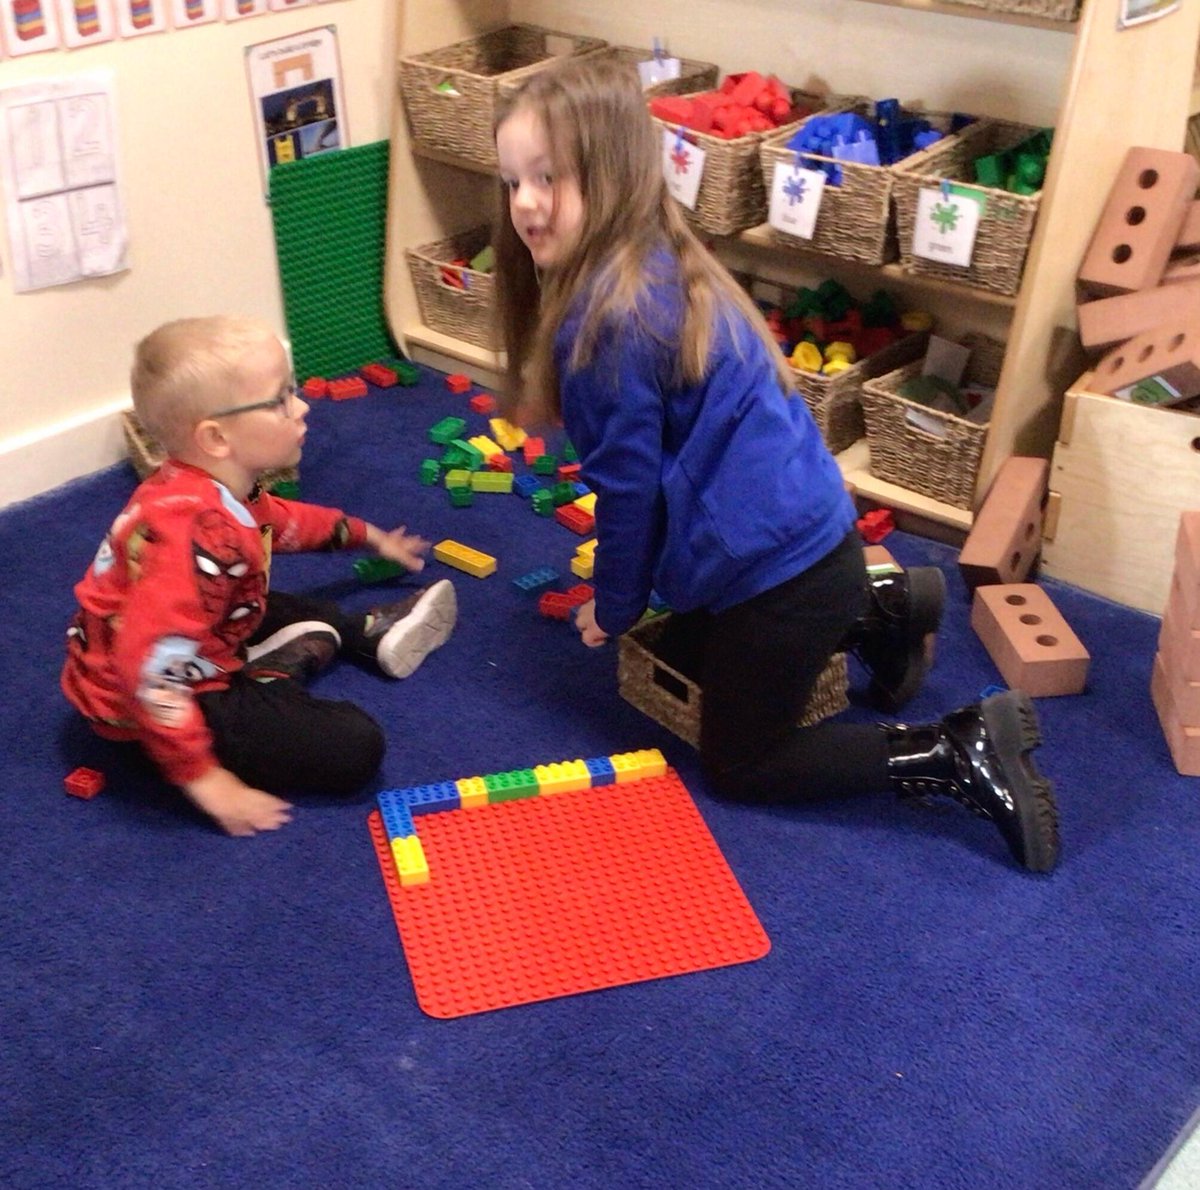 The children in the nursery have been busy together this week exploring their learning environment. @HMSWizardFS1 @DeltaStrand #Frienships #Fun